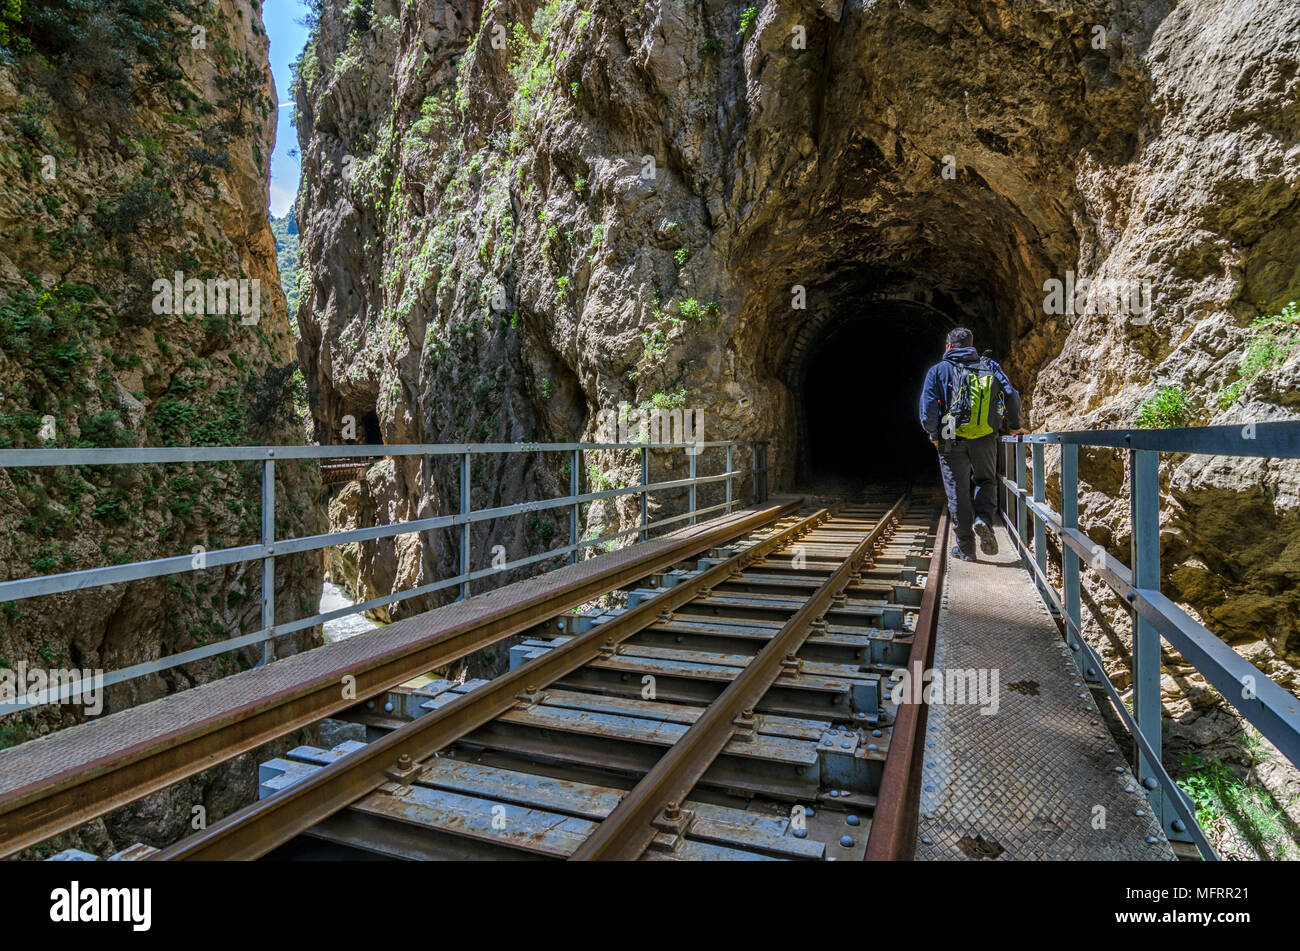 Hiking at Vouraikos gorge following the Diakopto–Kalavrita rack railway route. Peloponnese - Greece. A man with backpack is entering a tunnel Stock Photo